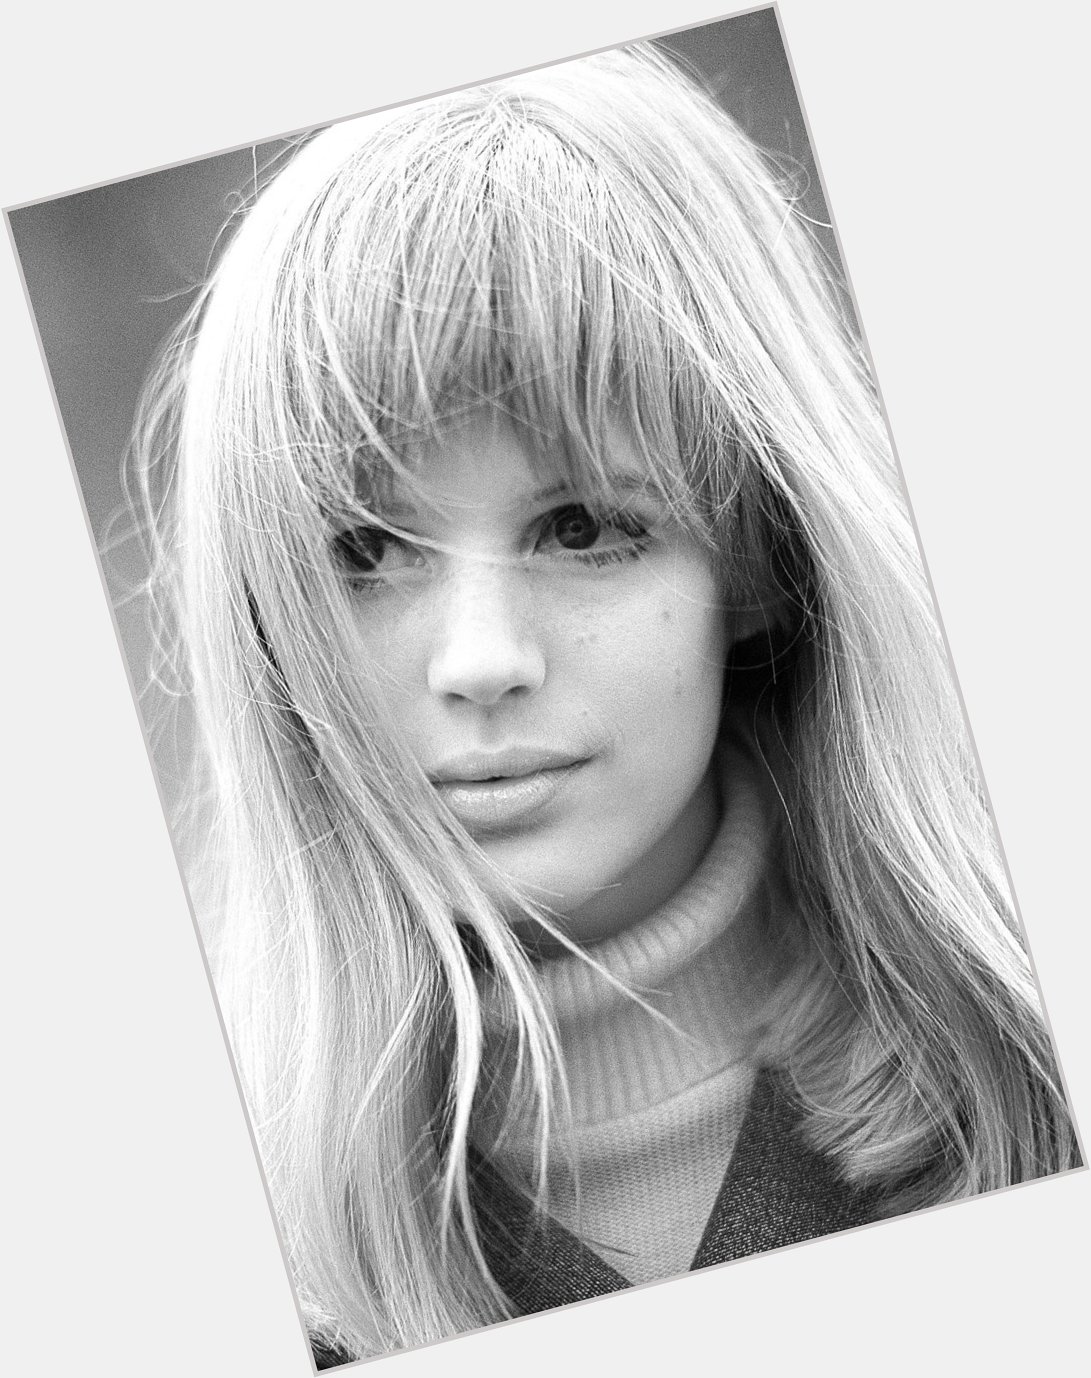 Rebellion is the only thing that keeps you alive! Marianne Faithfull
Happy Birthday 